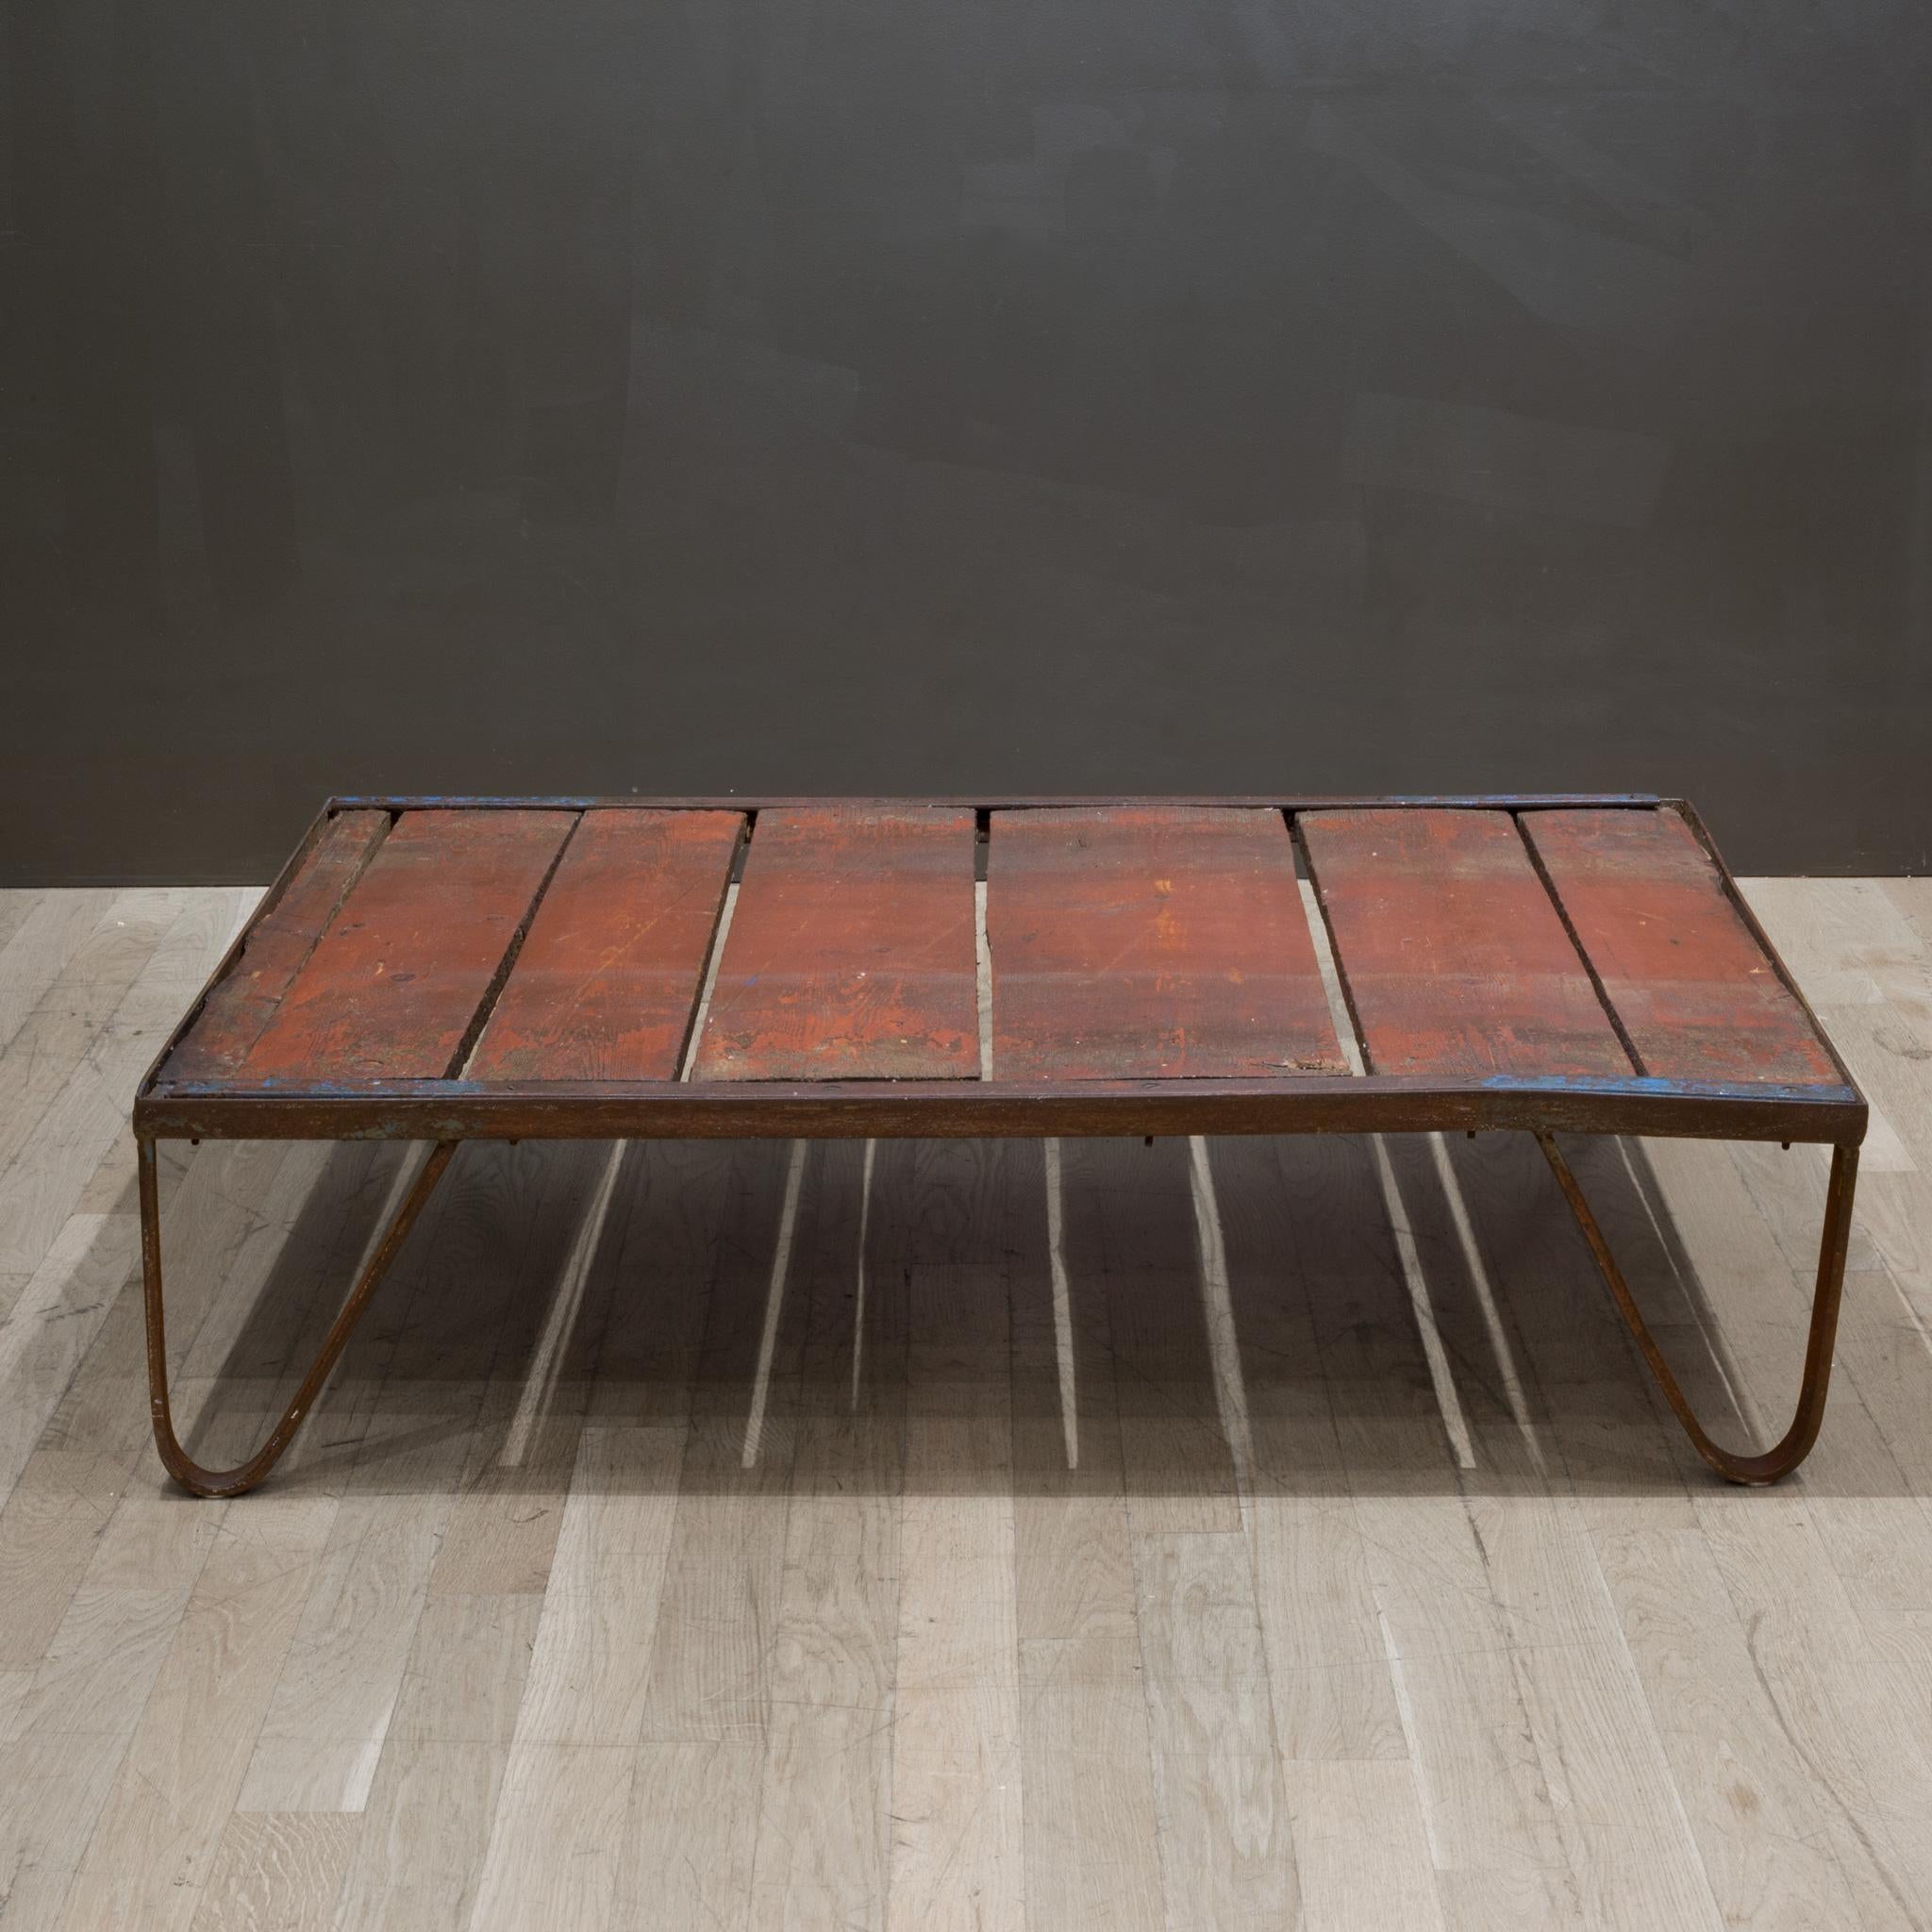 Early 20th c. Dutch Pallet Coffee Table, c.1940 In Good Condition For Sale In San Francisco, CA